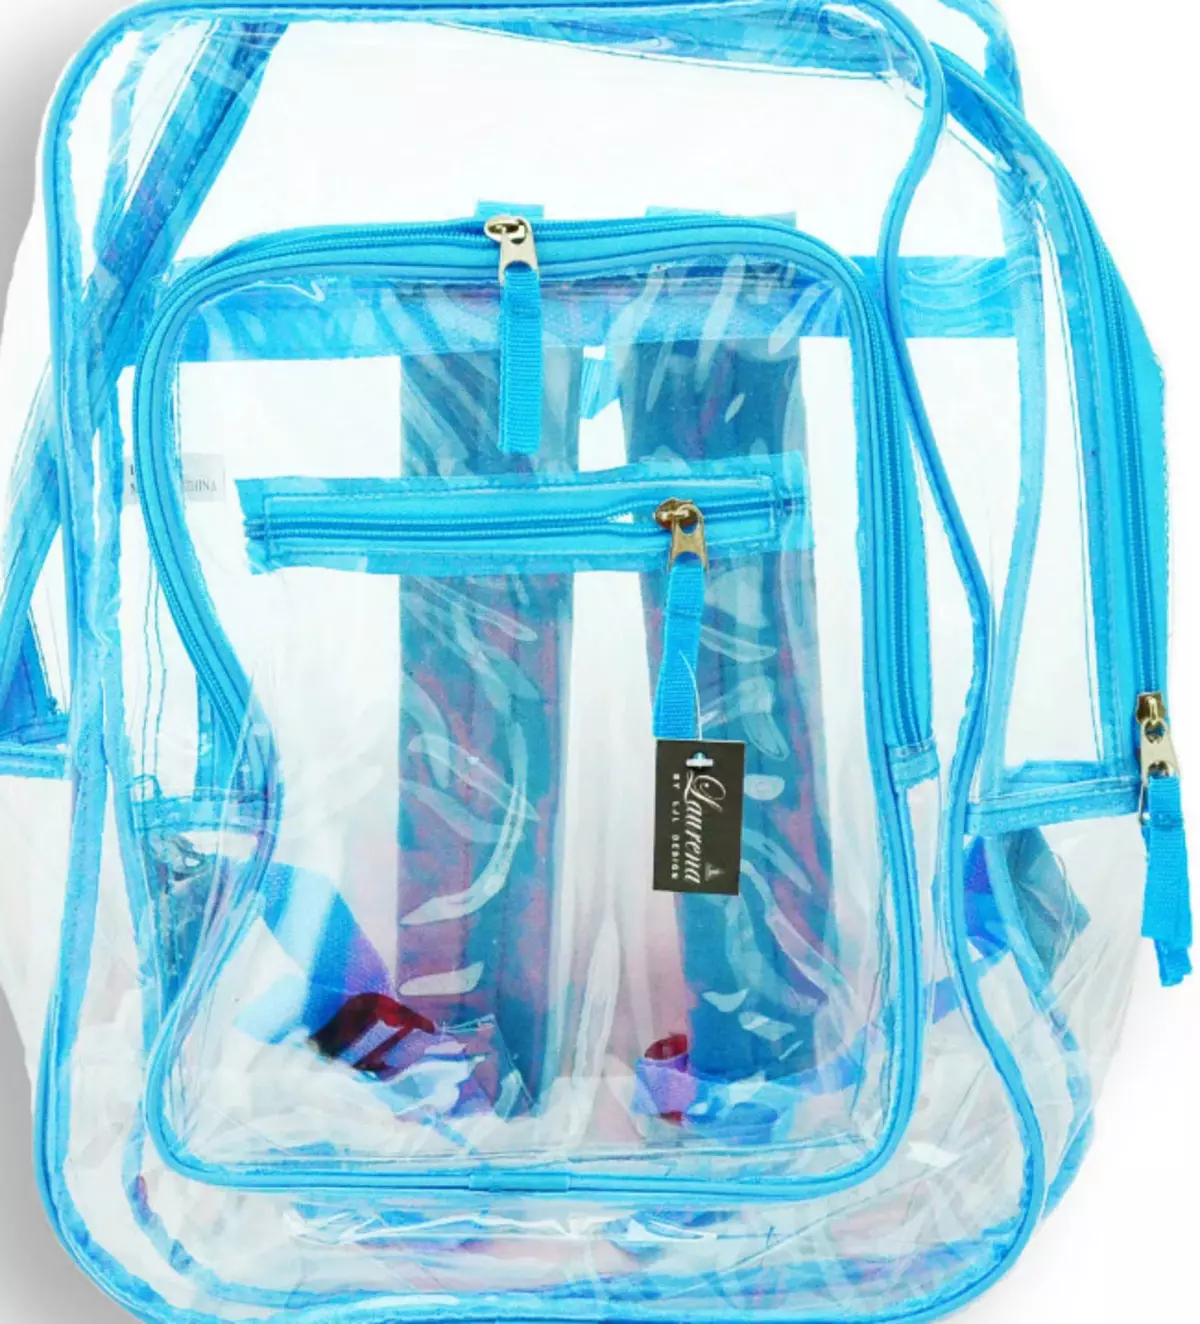 Transparent Backpacks: Little Women's Pink Translucent Models and Mini Backpacks with Sequins, White and Other Backpacks 15362_10